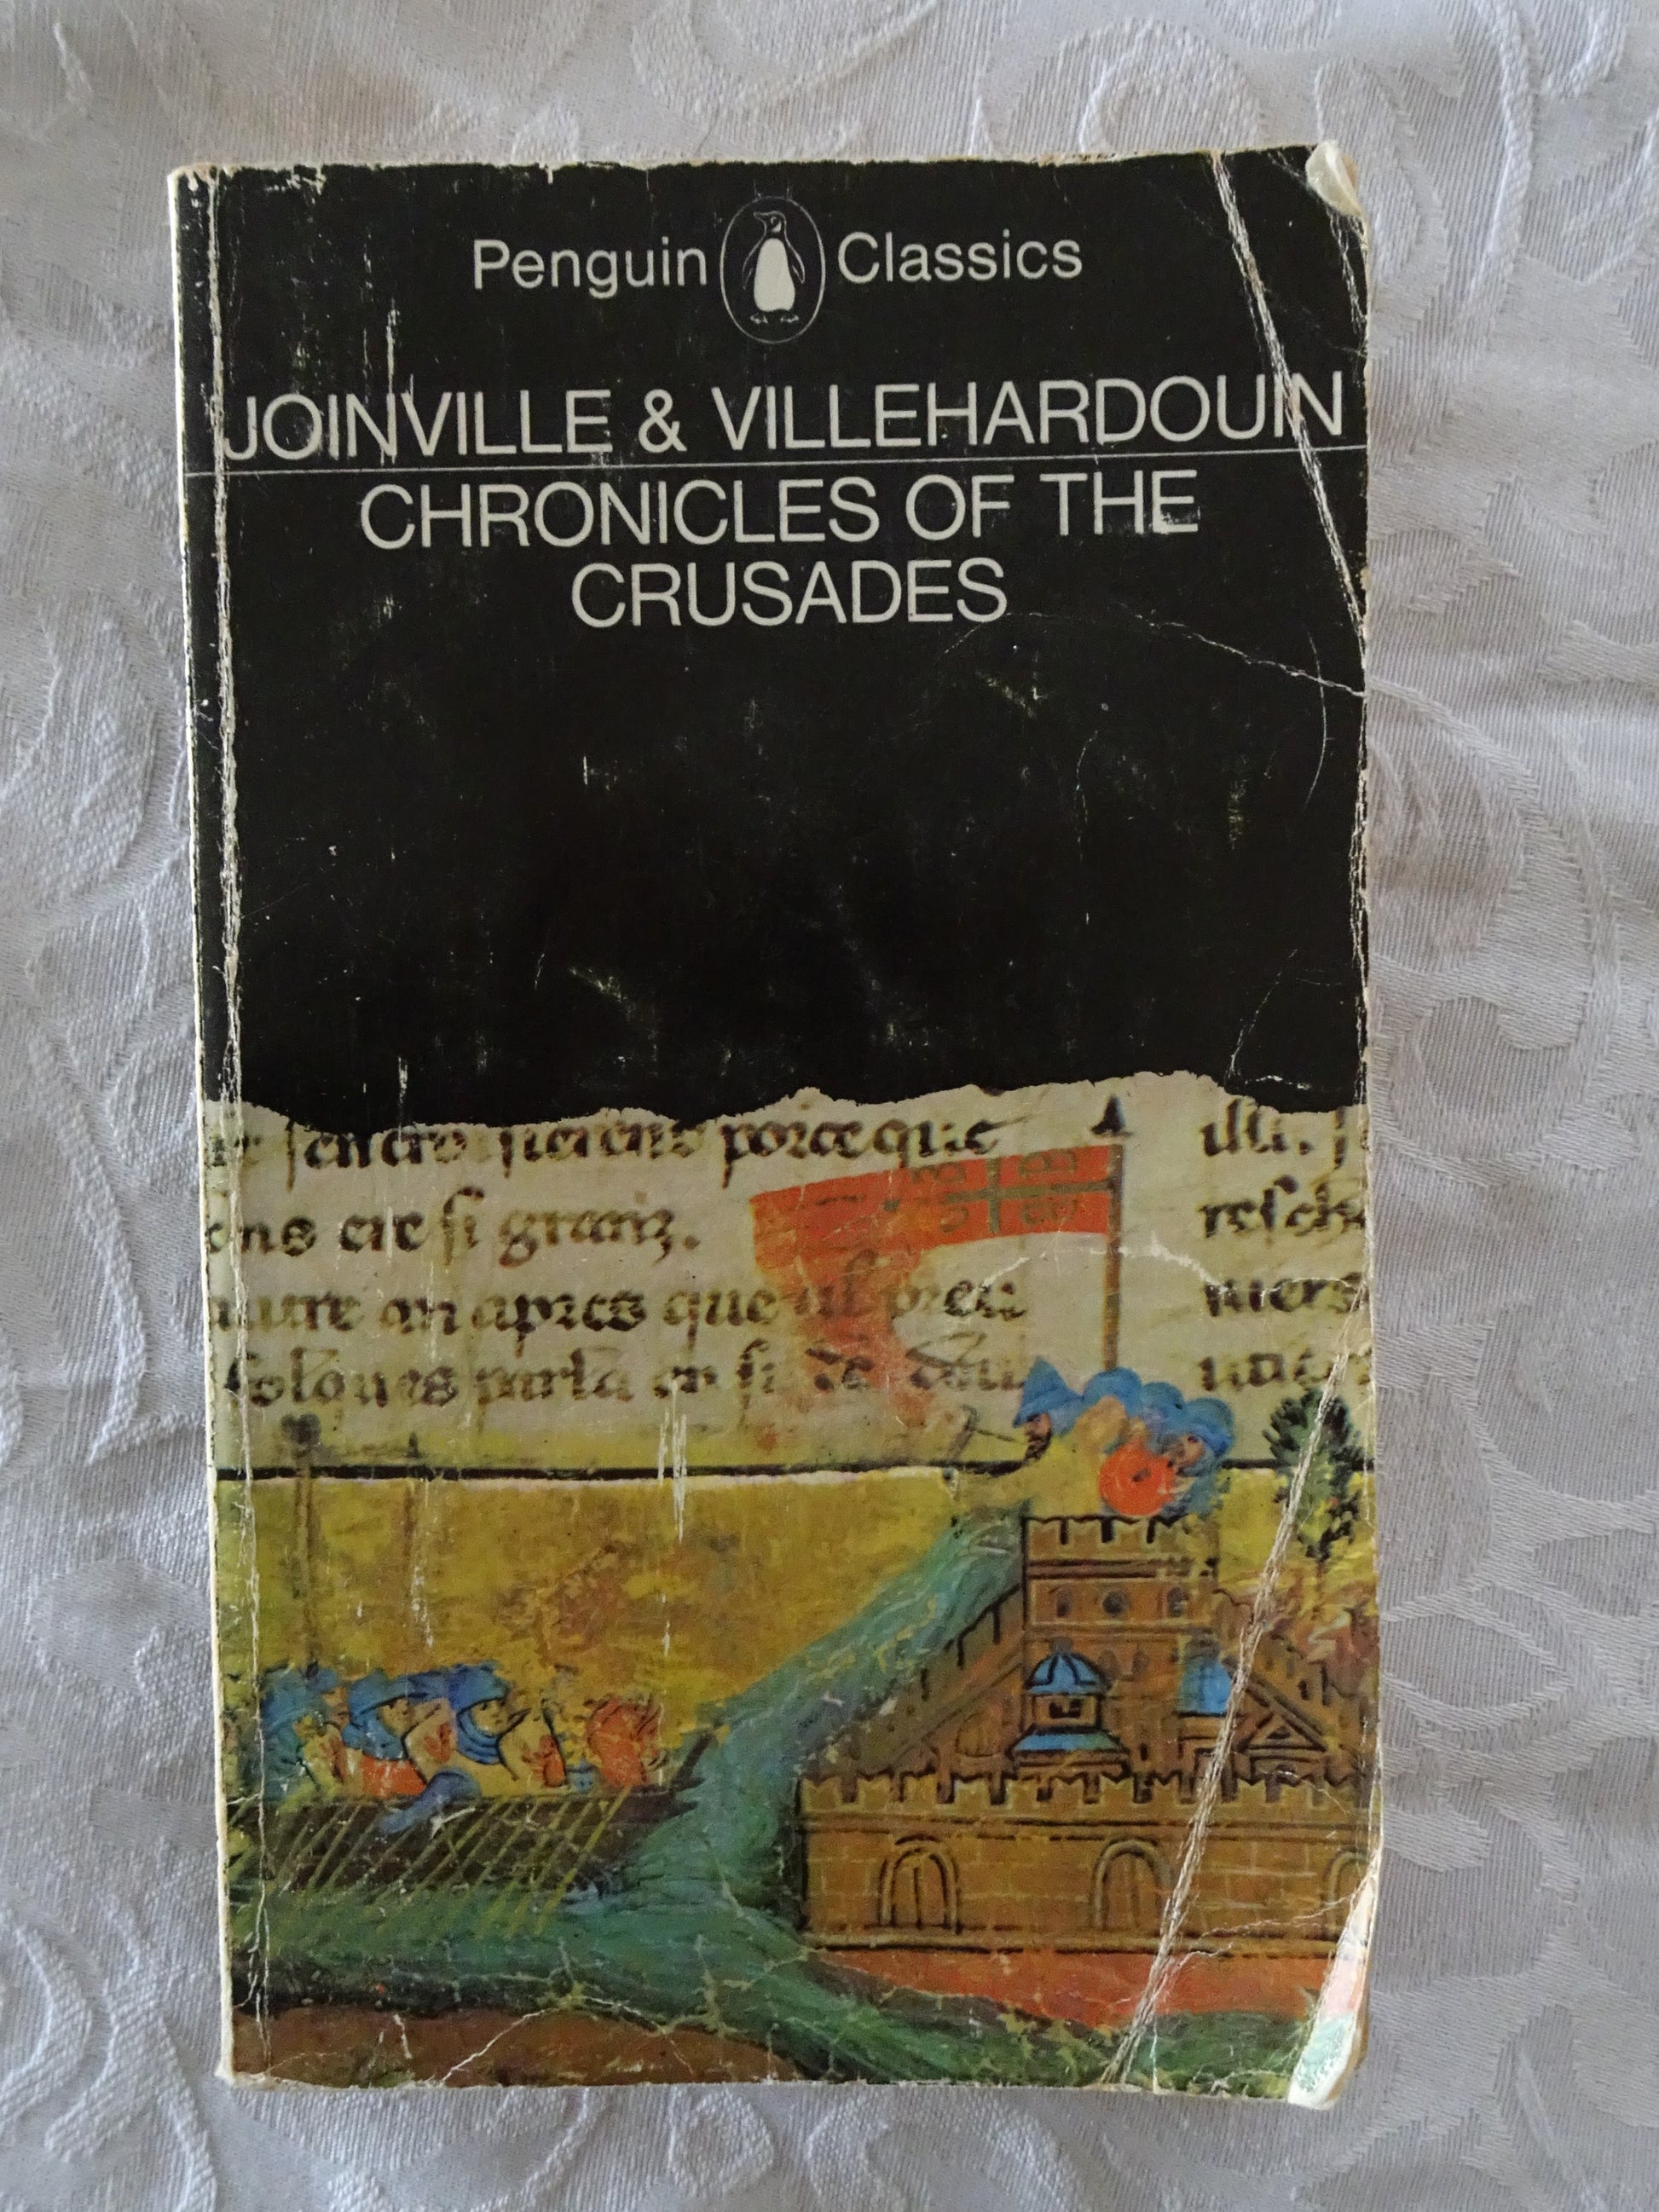 Chronicles of the Crusades by Joinville & Villehardouin